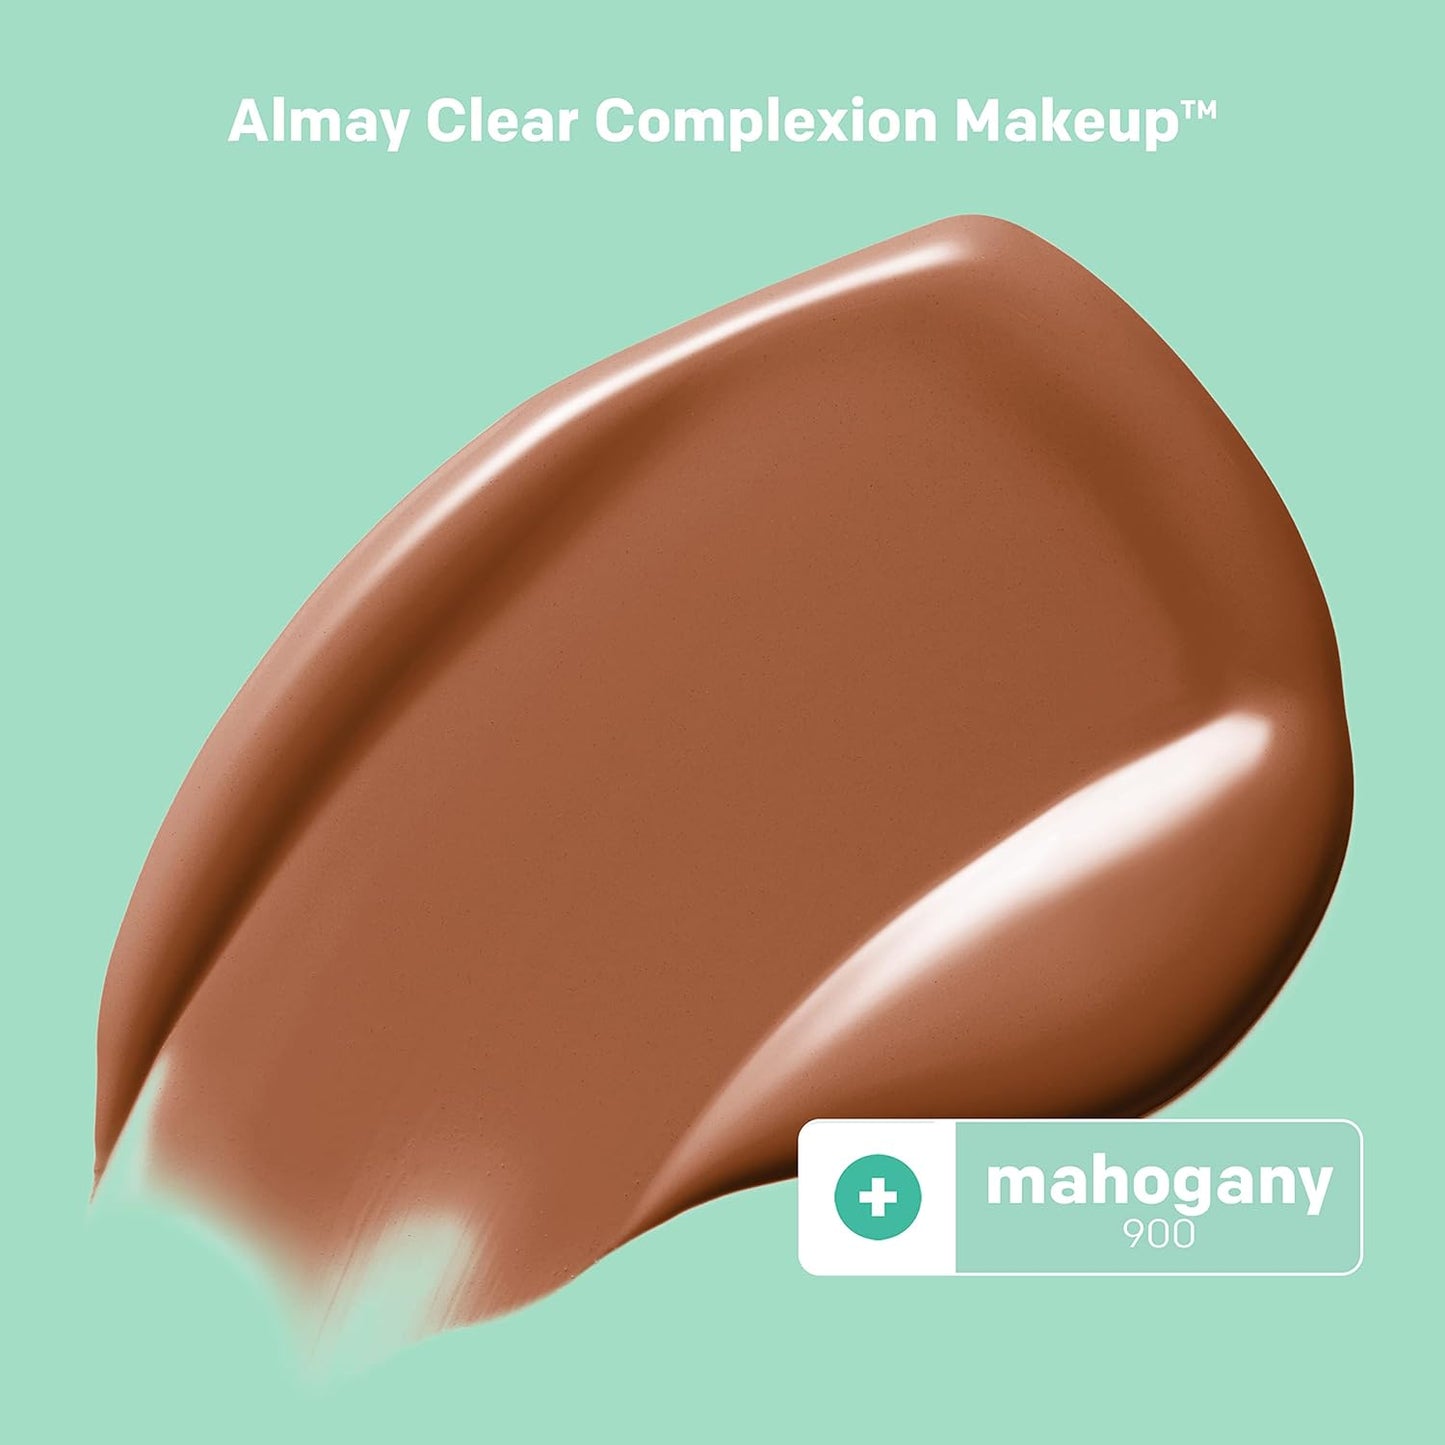 Almay Clear Complexion Acne Foundation Makeup with Salicylic Acid - Lightweight, Medium Coverage, Hypoallergenic, Fragrance-Free, for Sensitive Skin, 900 Mahogany, 1 fl oz. - Clarissa Maxwell 